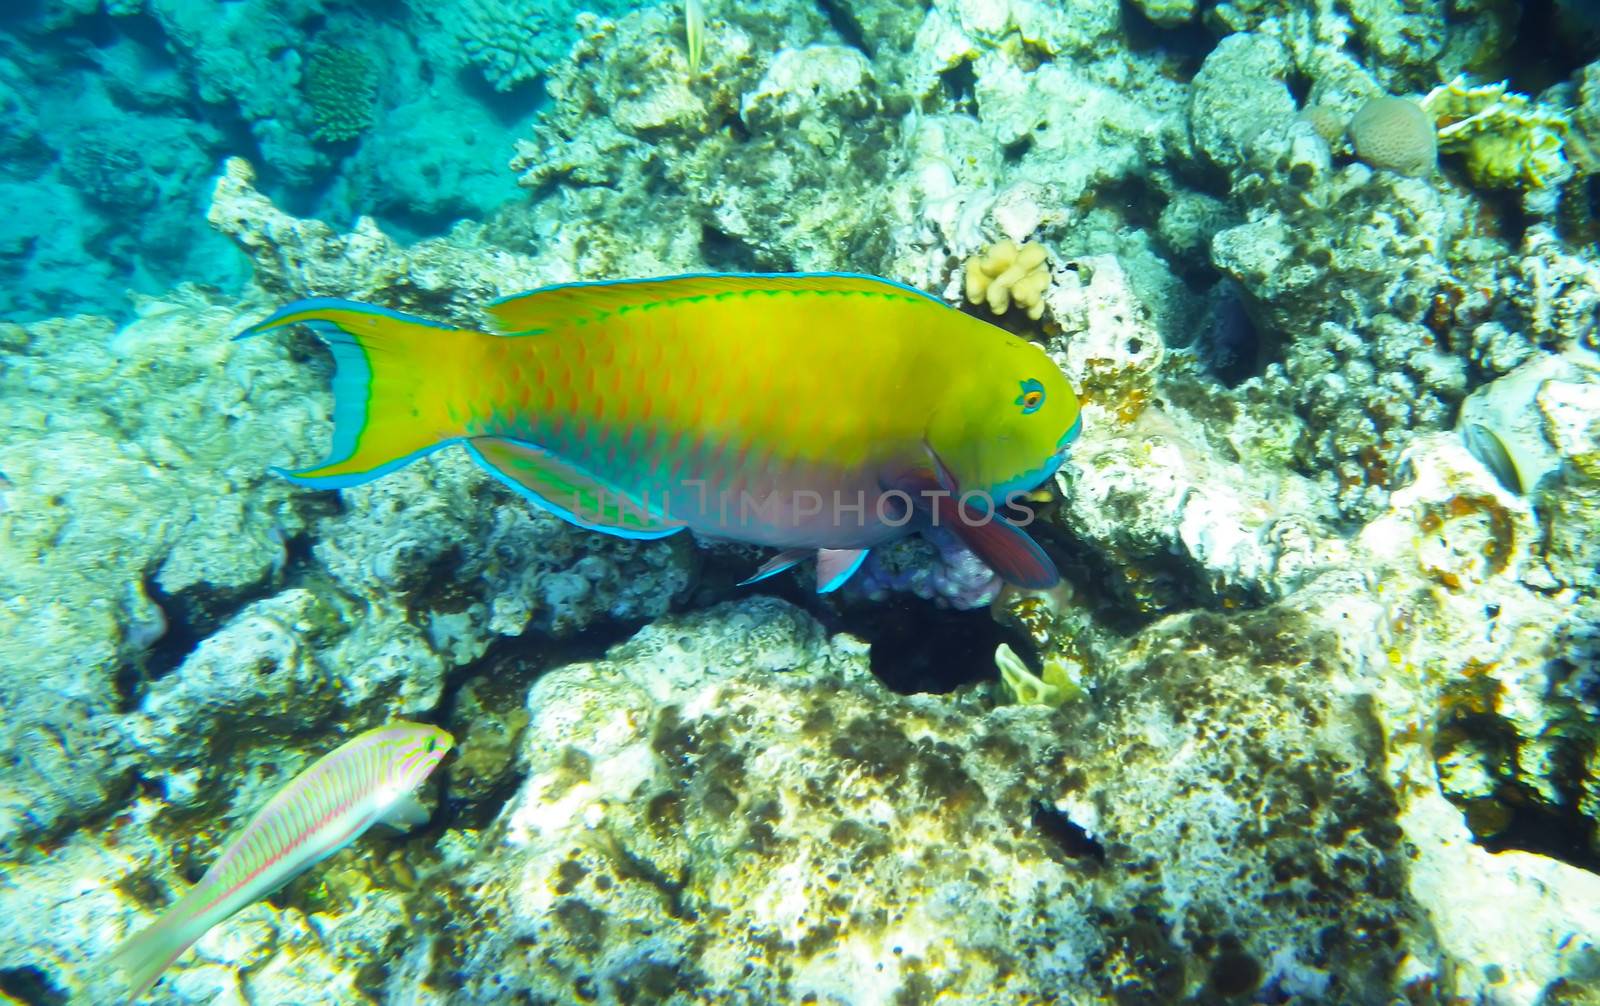 Blue tang surgeon fish underwater red sea by RawGroup